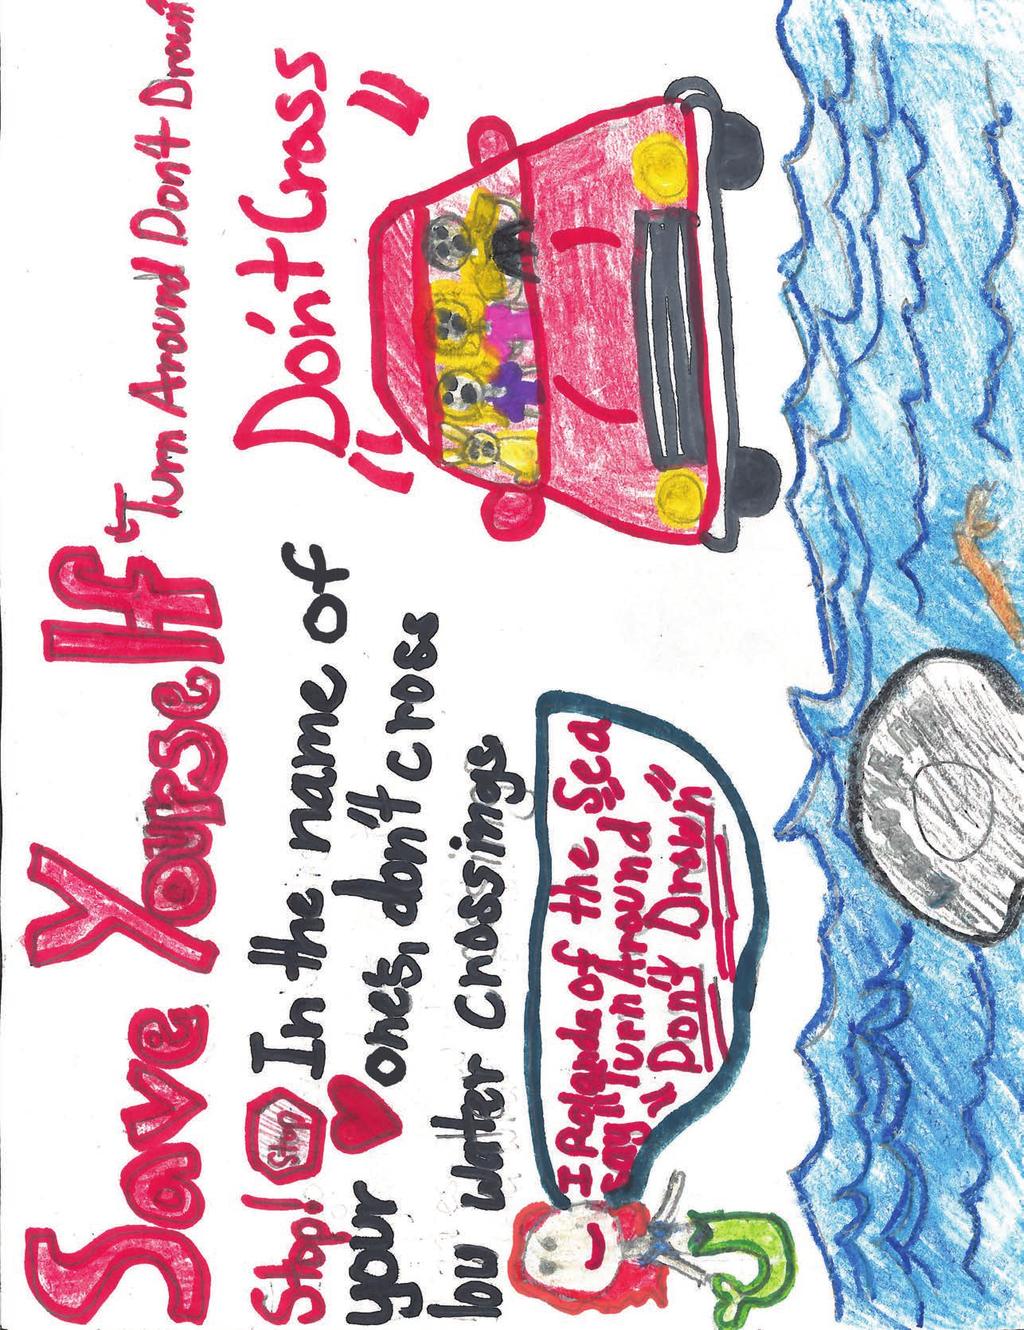 Poster by: Avery 4th place grade 3-5 5 6 7 12 13 14 JANUARY 2 3 4 8 9 10 11 15 16 17 18 19 20 21 22 23 24 25 26 27 28 29 30 31 GROUND HOG DAY TexAnna TADDpole s Tip: Make sure your family has an